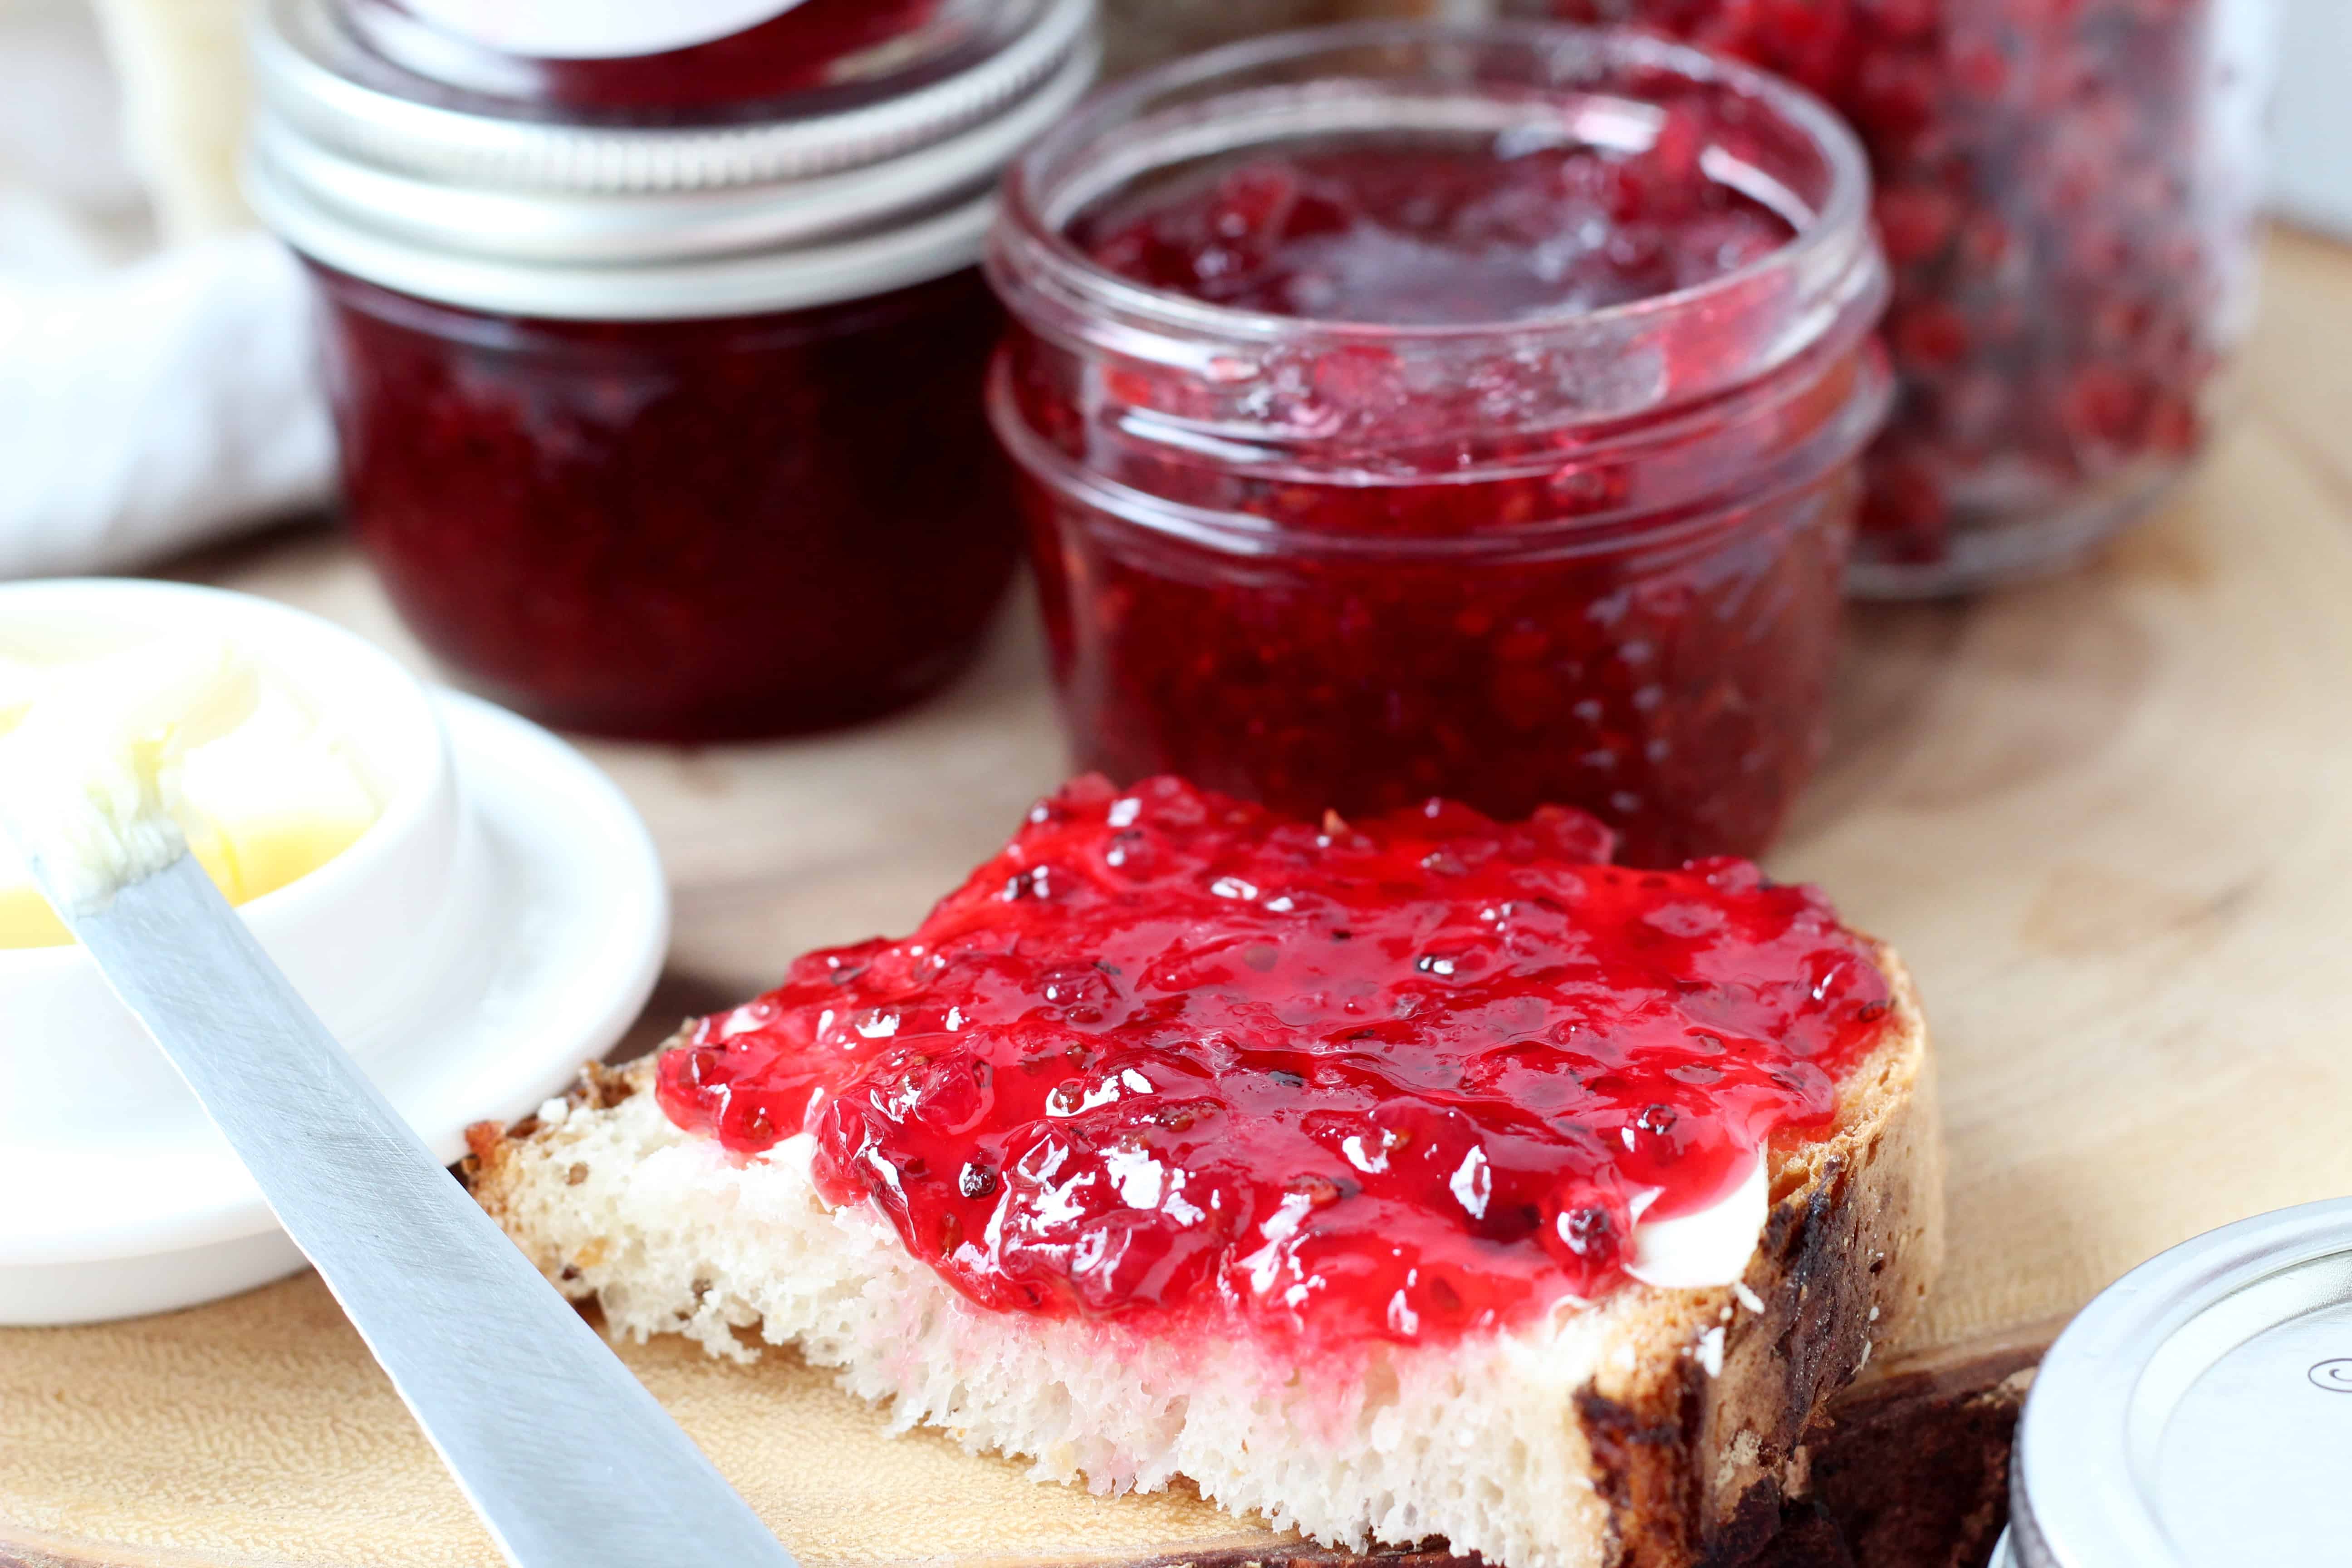 homemade red currant jam